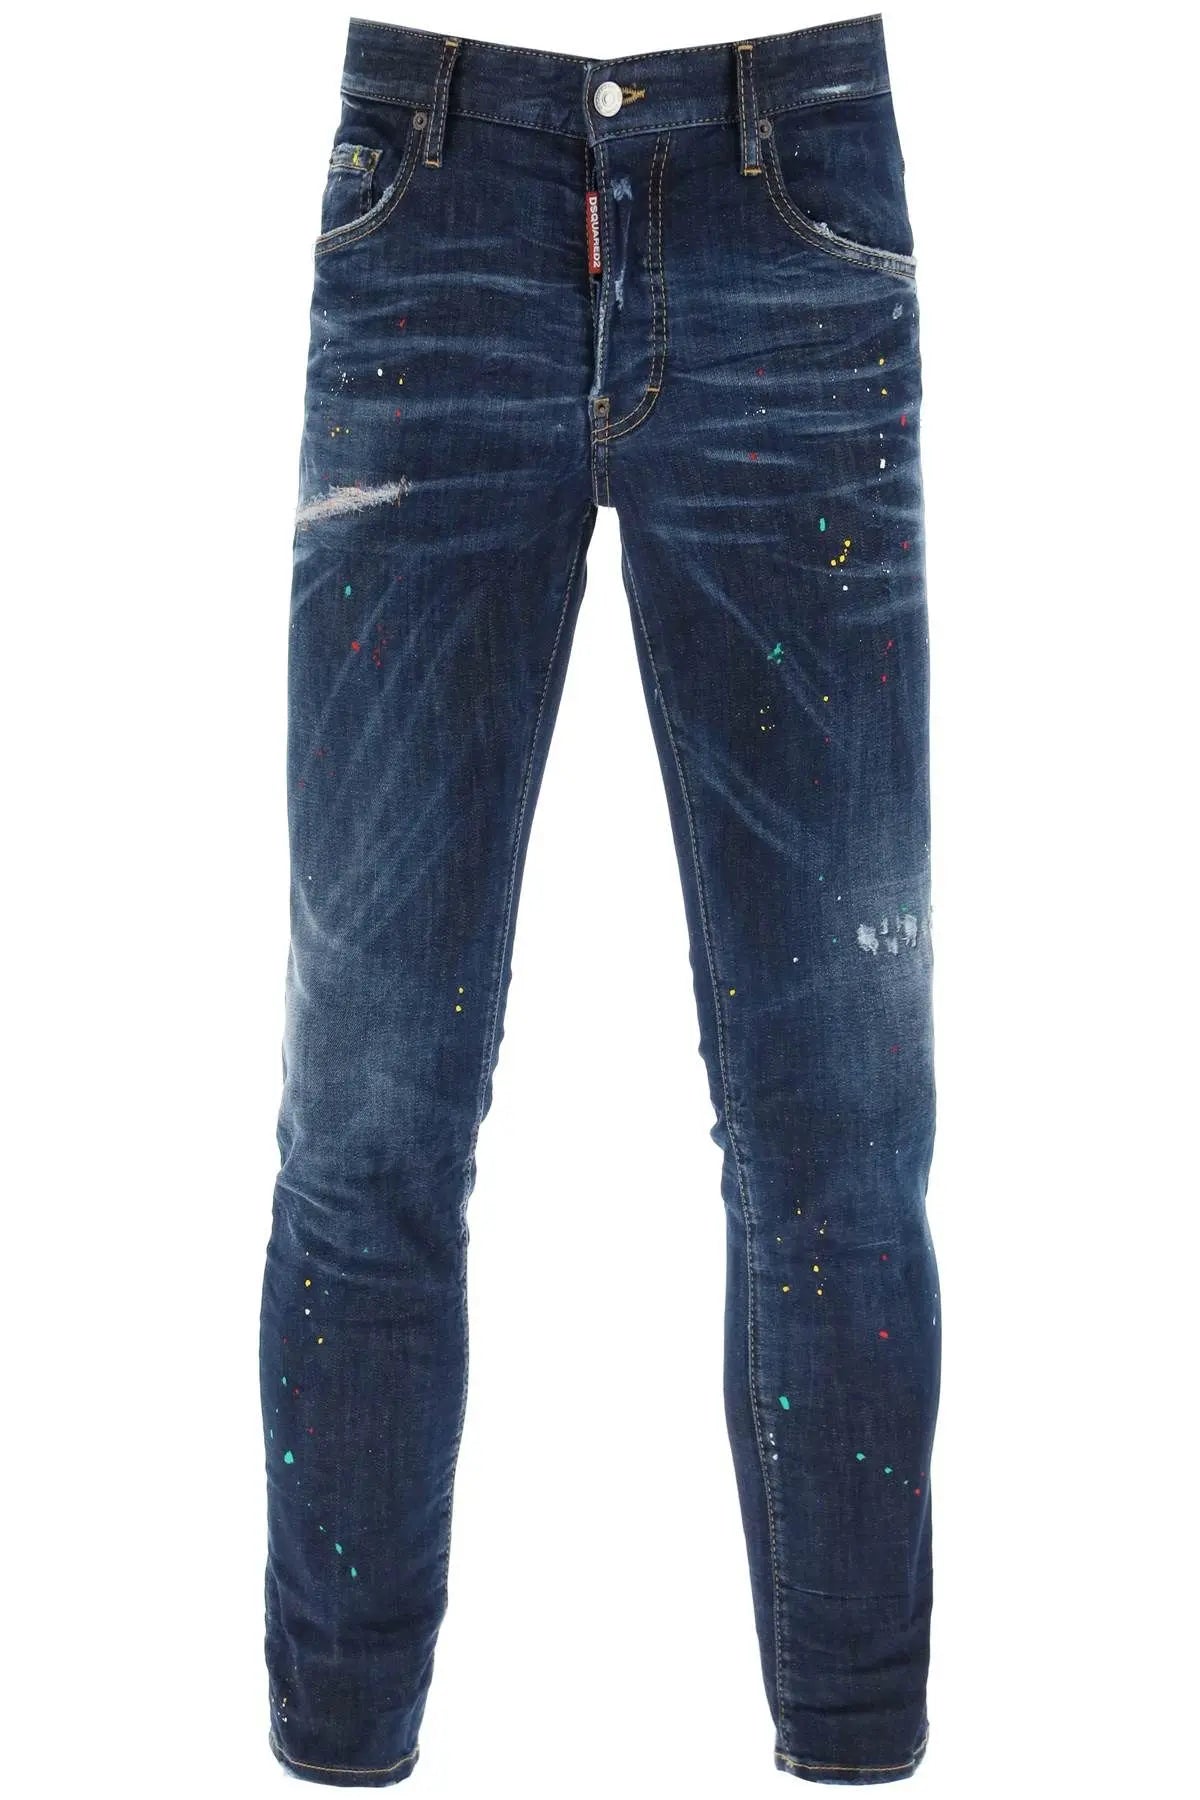 DSQUARED Jeans S71LB1165 - Georgios Clothing Store